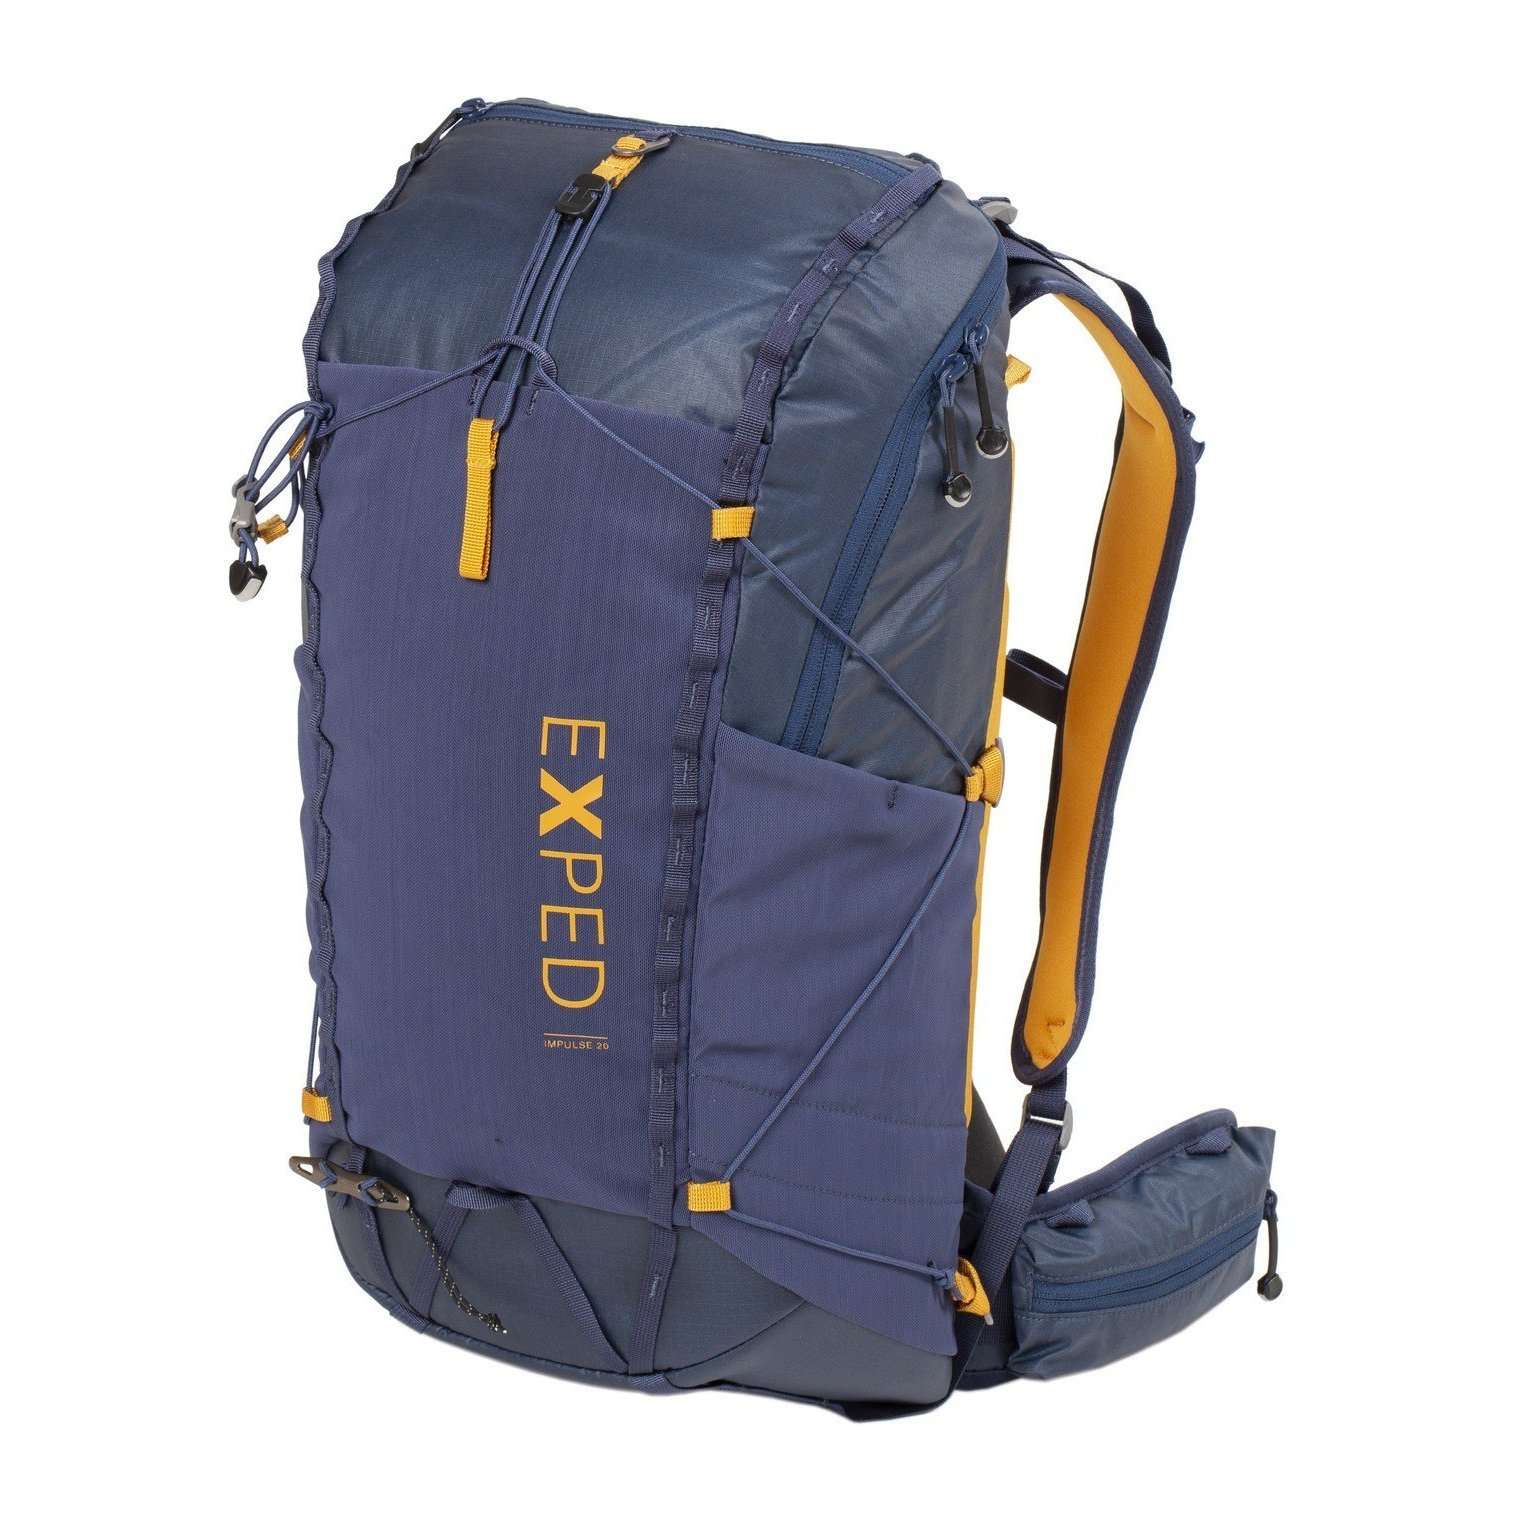 Exped, Exped Impulse 20 Litre, Rucksacks/Packs,Wylies Outdoor World,